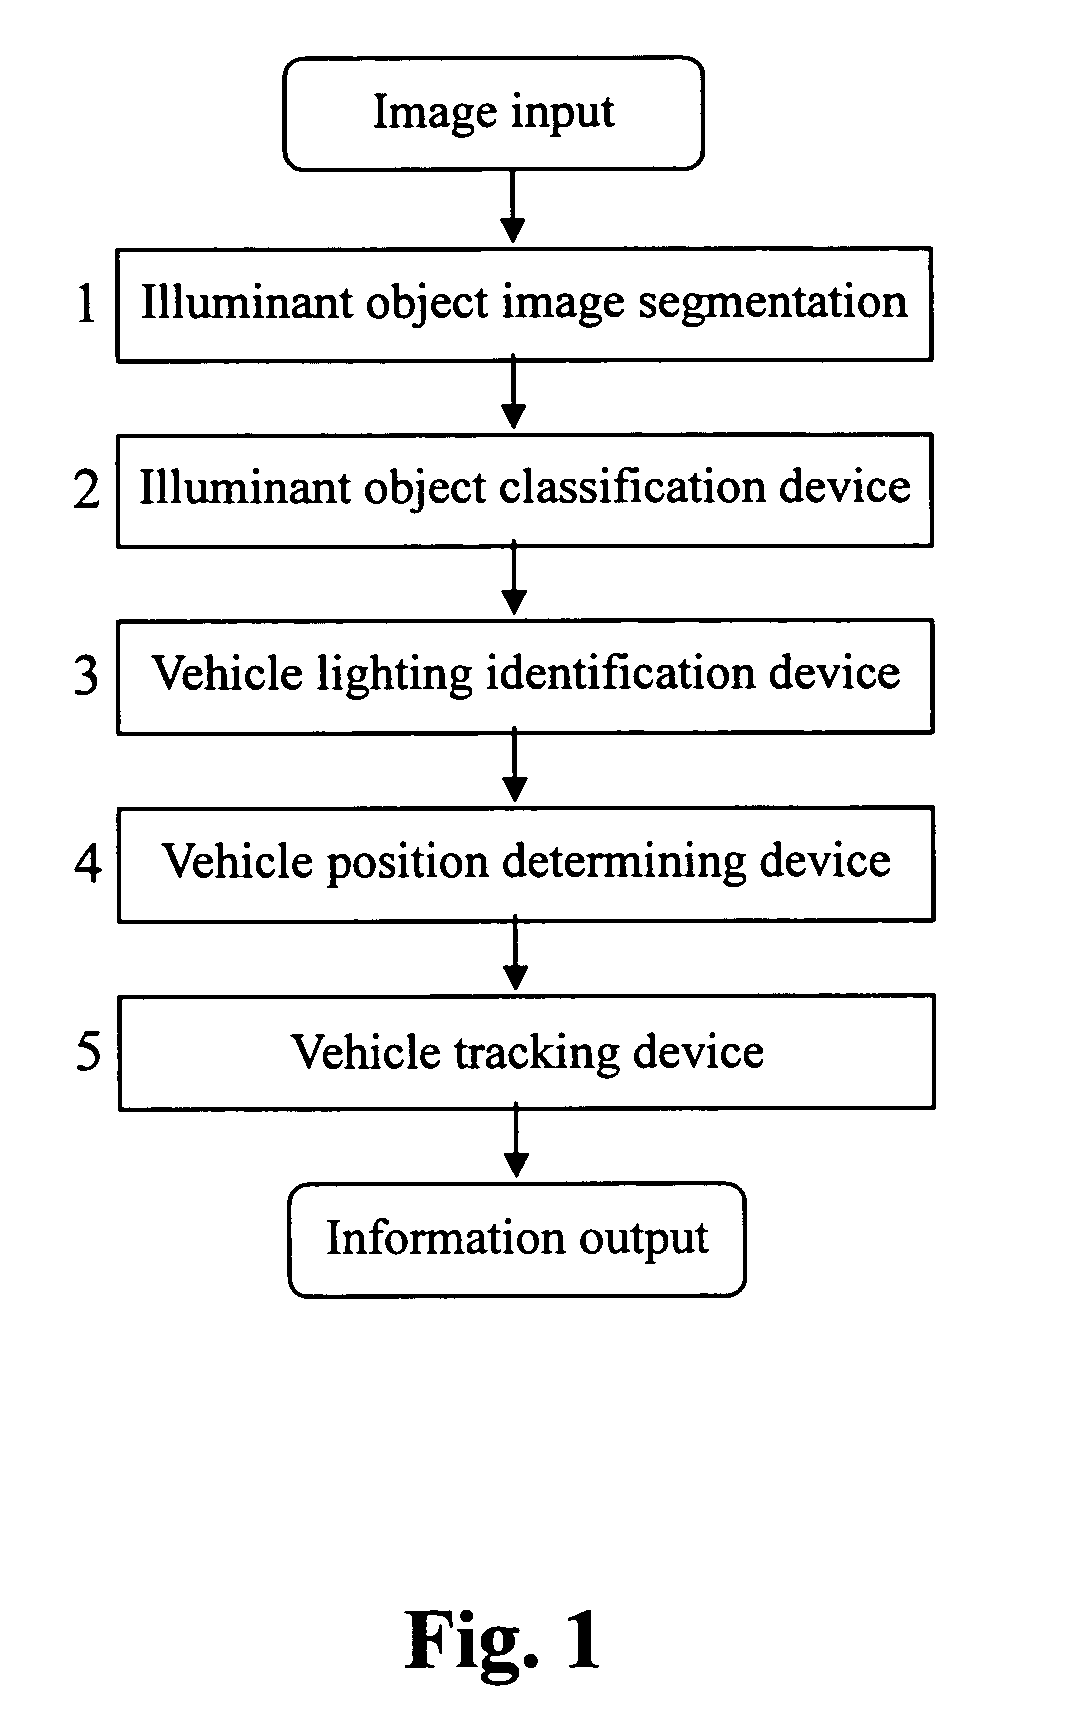 Real-time nighttime vehicle detection and recognition system based on computer vision